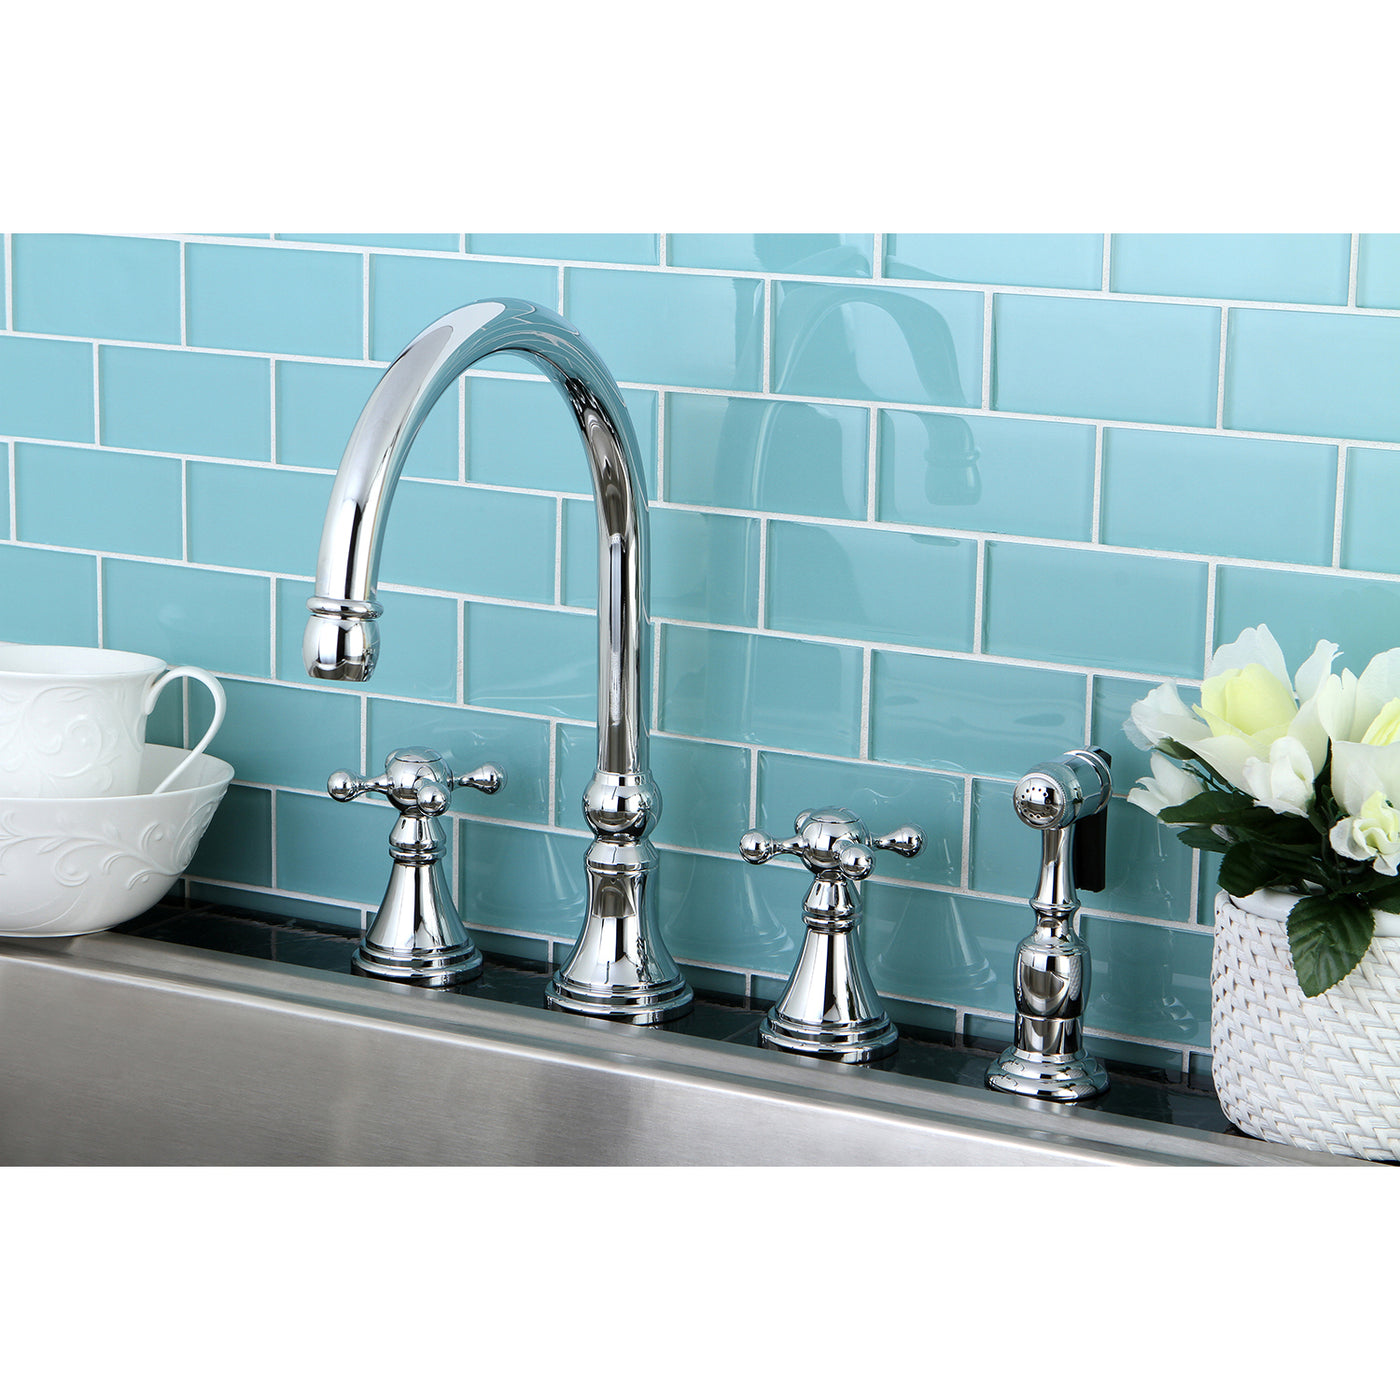 Elements of Design ES2791KXBS Widespread Kitchen Faucet with Brass Sprayer, Polished Chrome